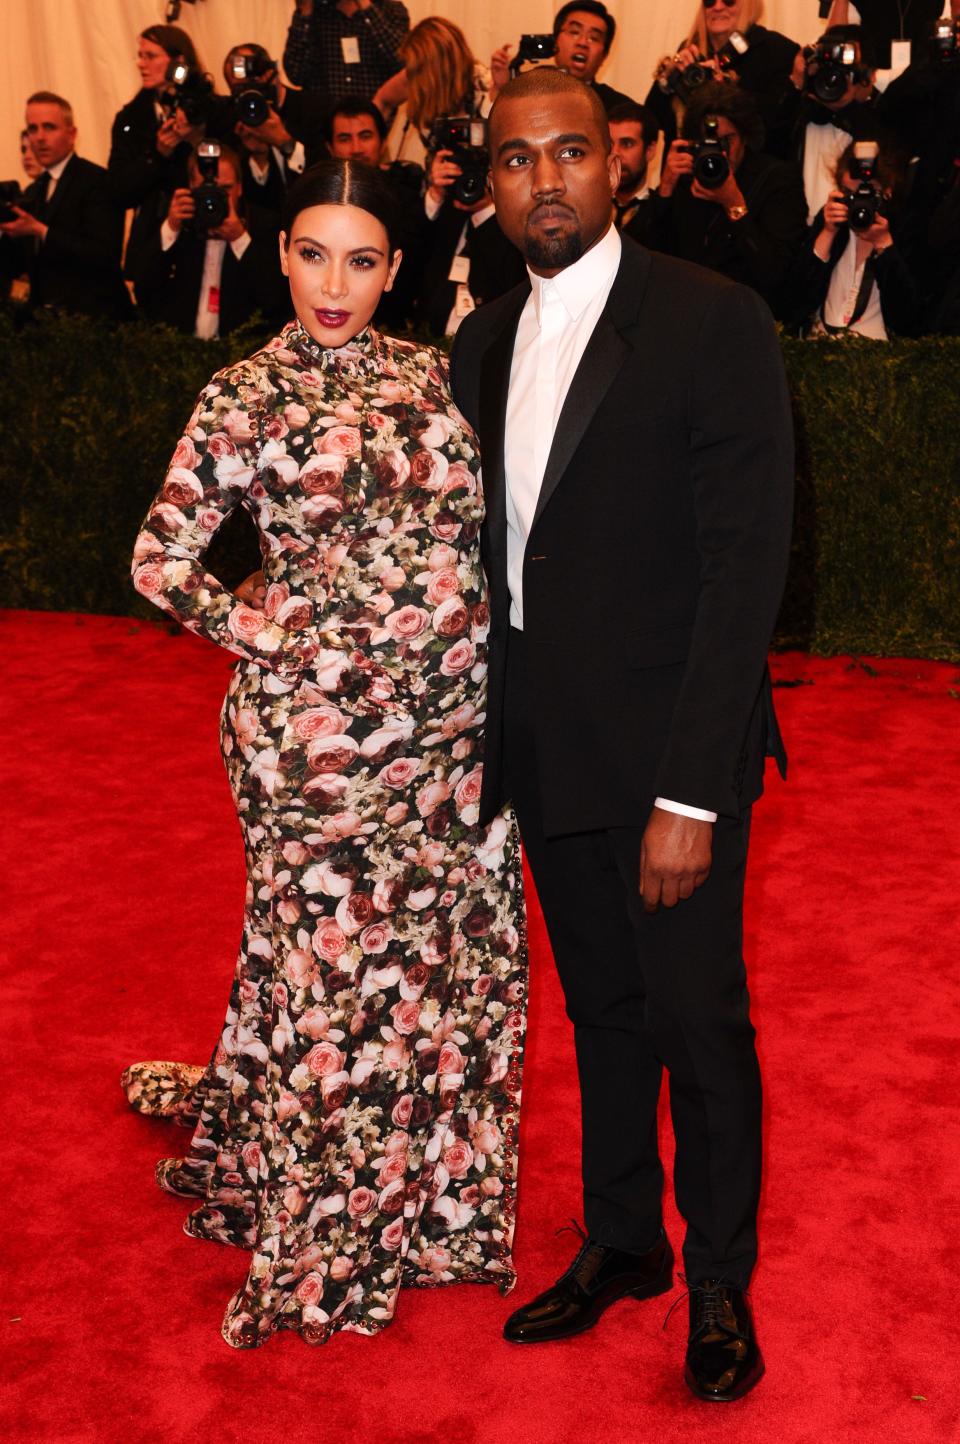 Kim Kardashian and Kanye West, worst dressed met gala celebrities list, Costume Institute Gala Benefit celebrating the Punk: Chaos To Couture exhibition, Metropolitan Museum of Art, New York, America - 06 May 2013